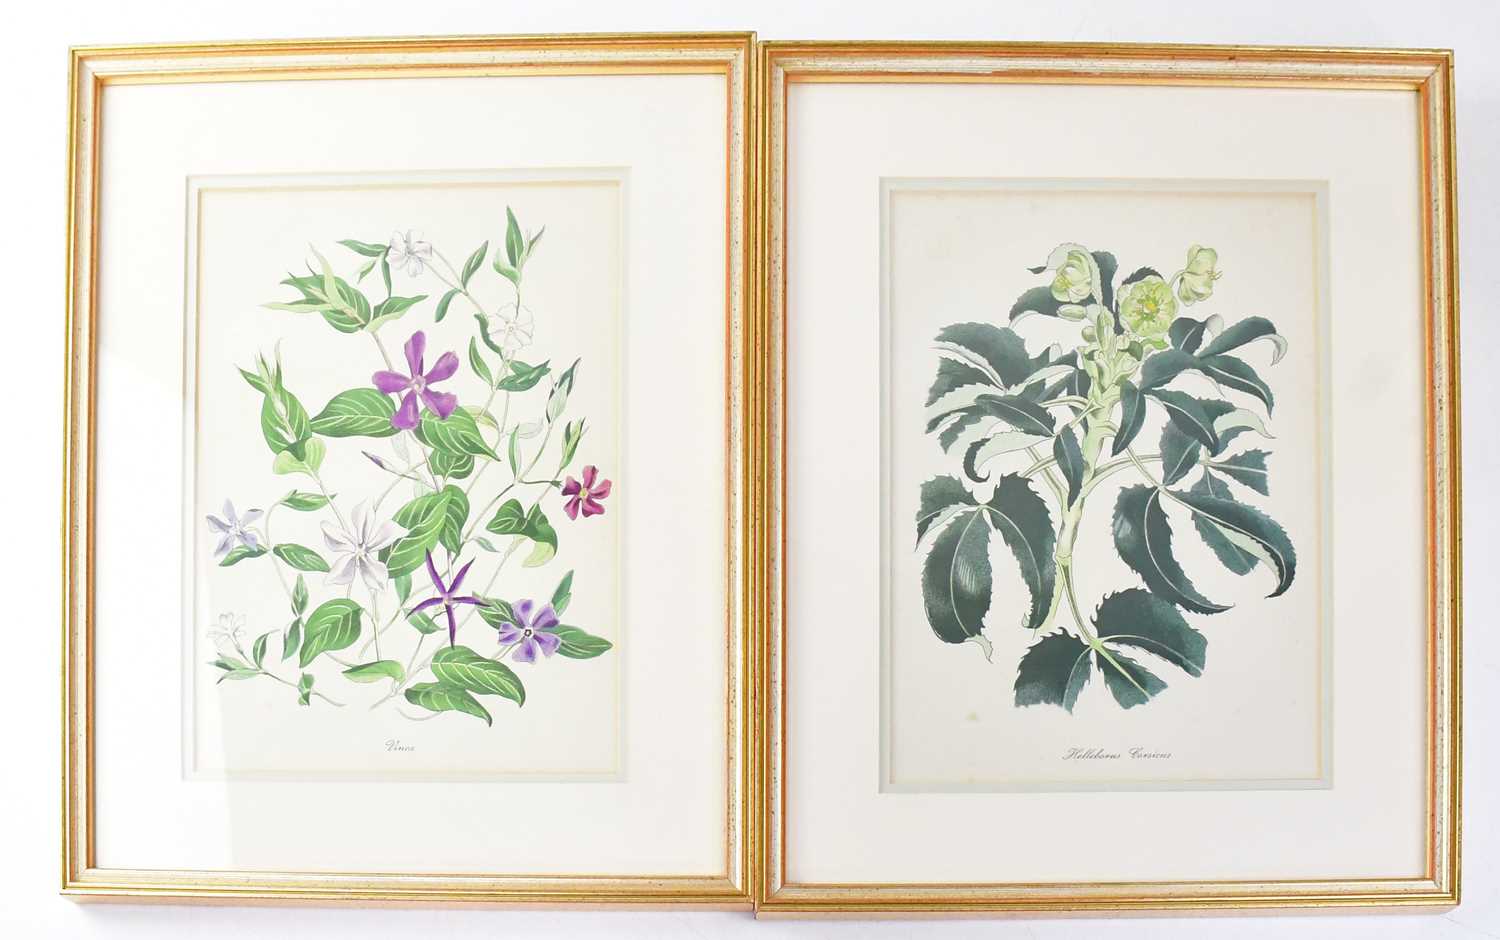 JOHN NASH (1893-1977); a set of twelve colour lithographs, English Garden Flowers, printed by W S - Image 4 of 6